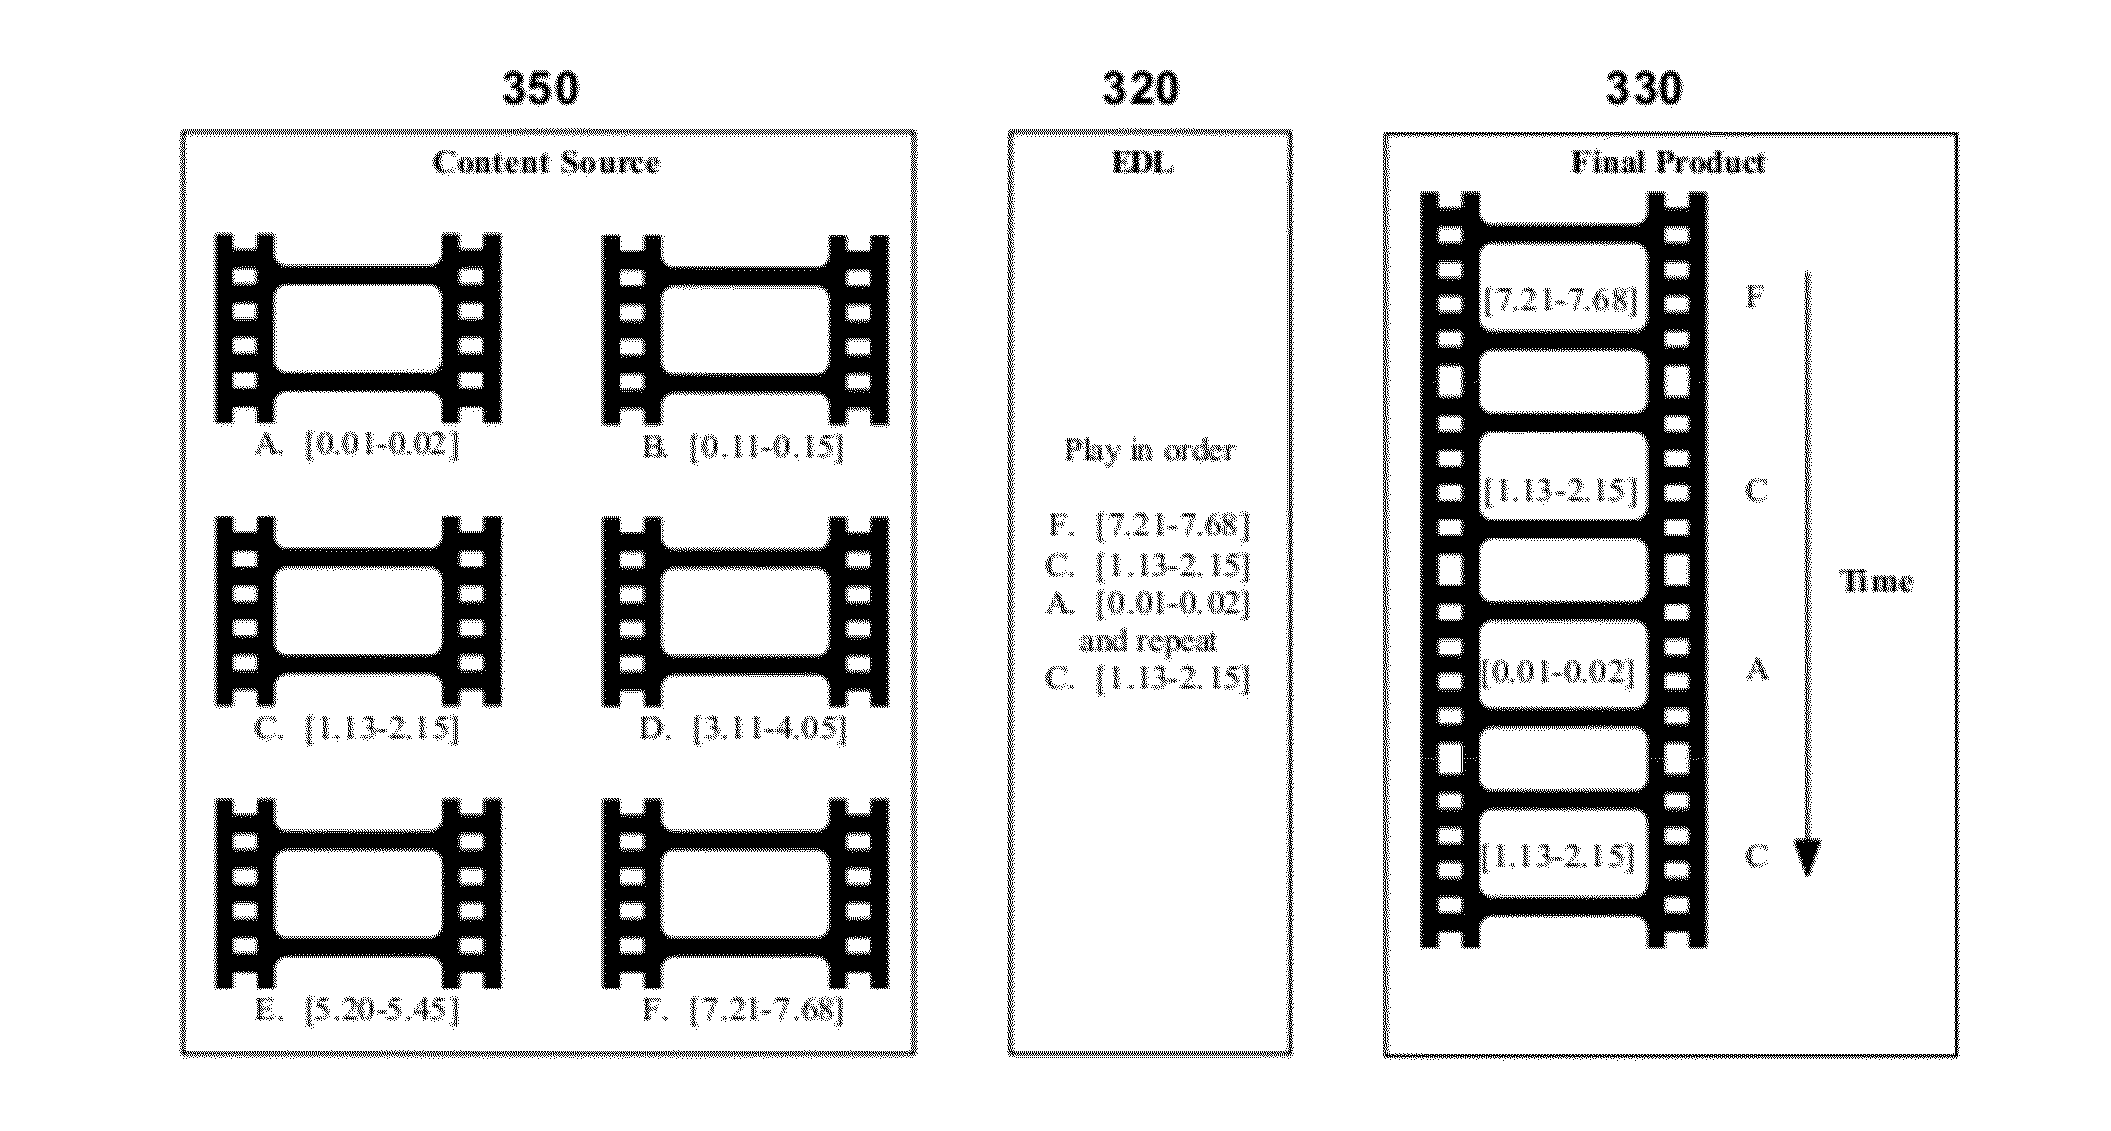 System and method for distributing a media product by providing access to an edit decision list